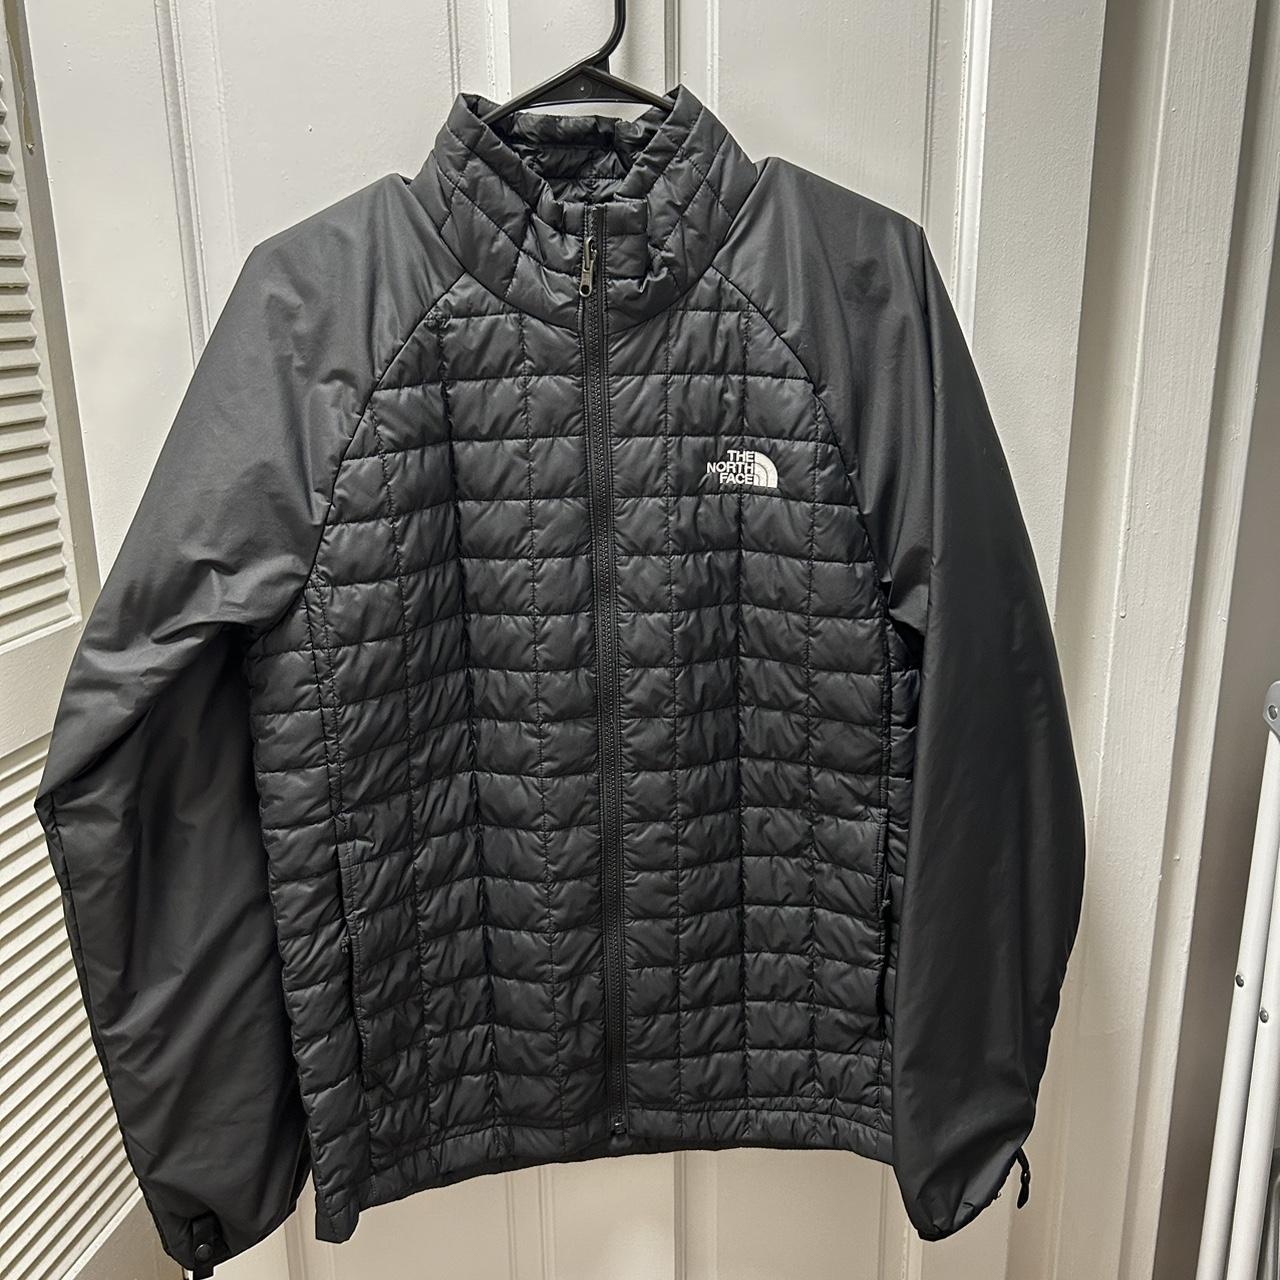 Mens north face jacket size small - Depop